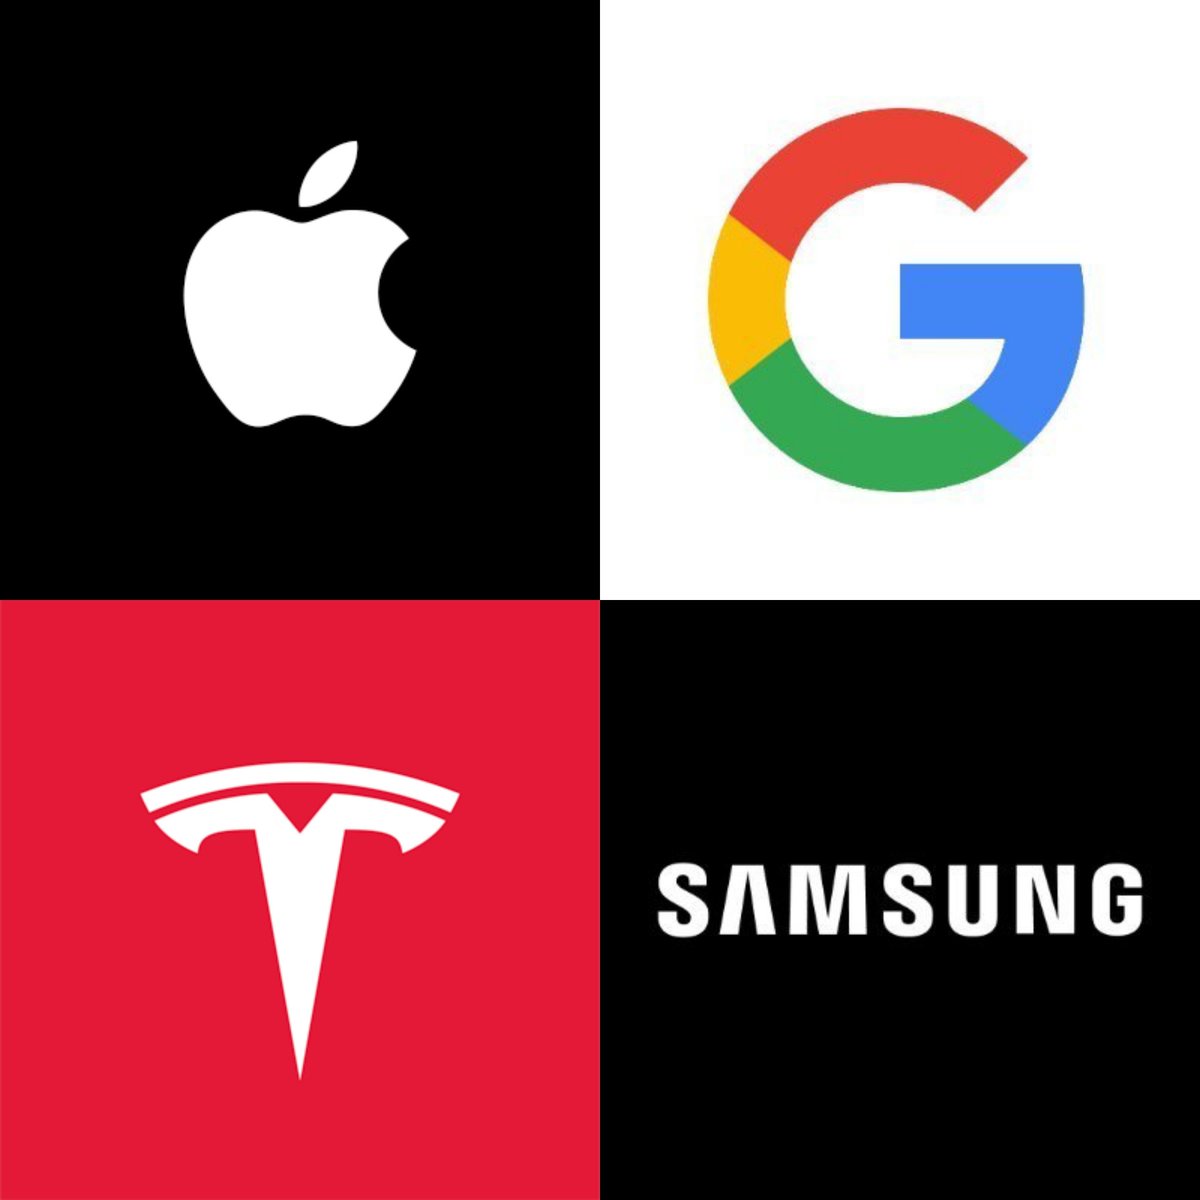 Which tech company makes the most overpriced products?